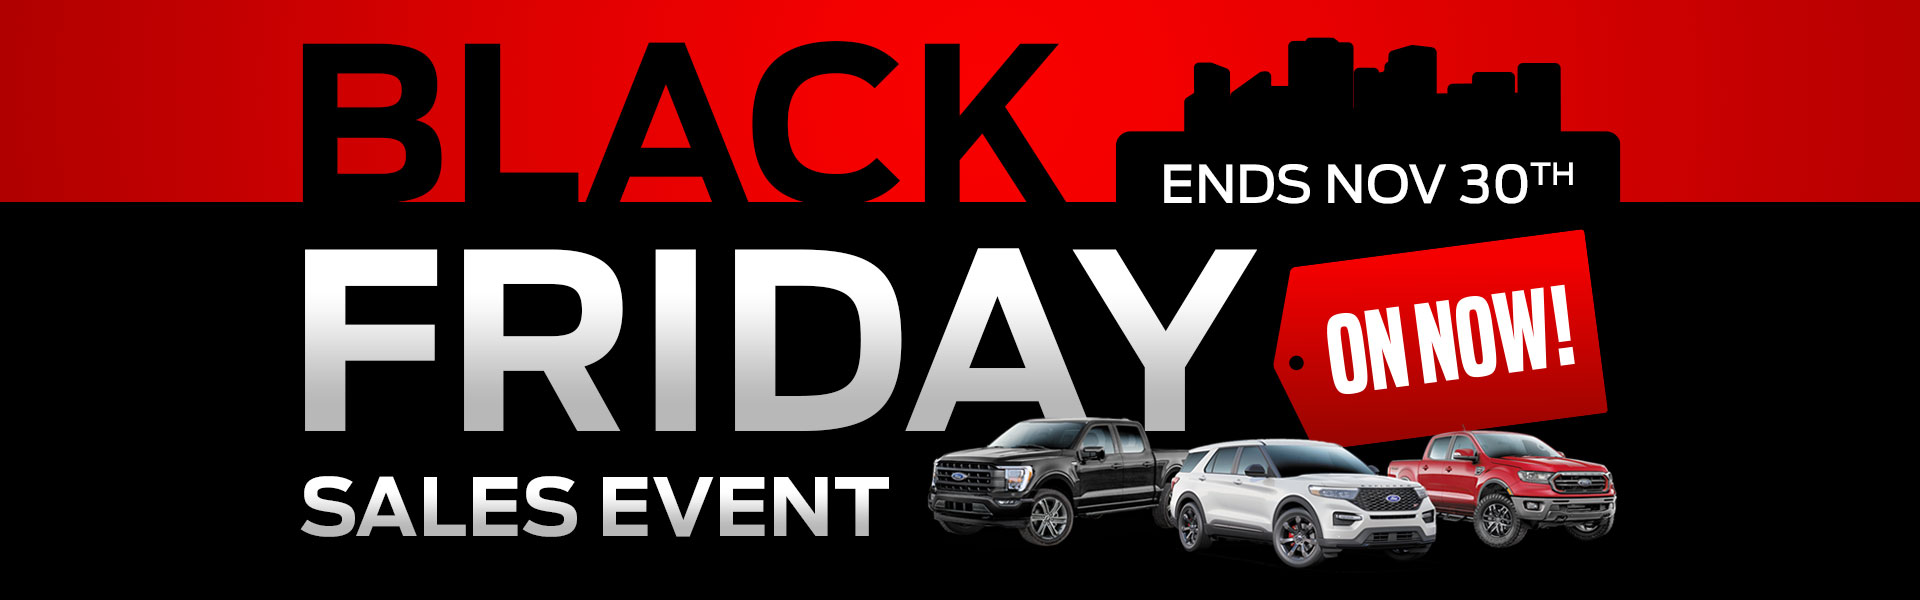 City Ford Black Friday Sales Event!